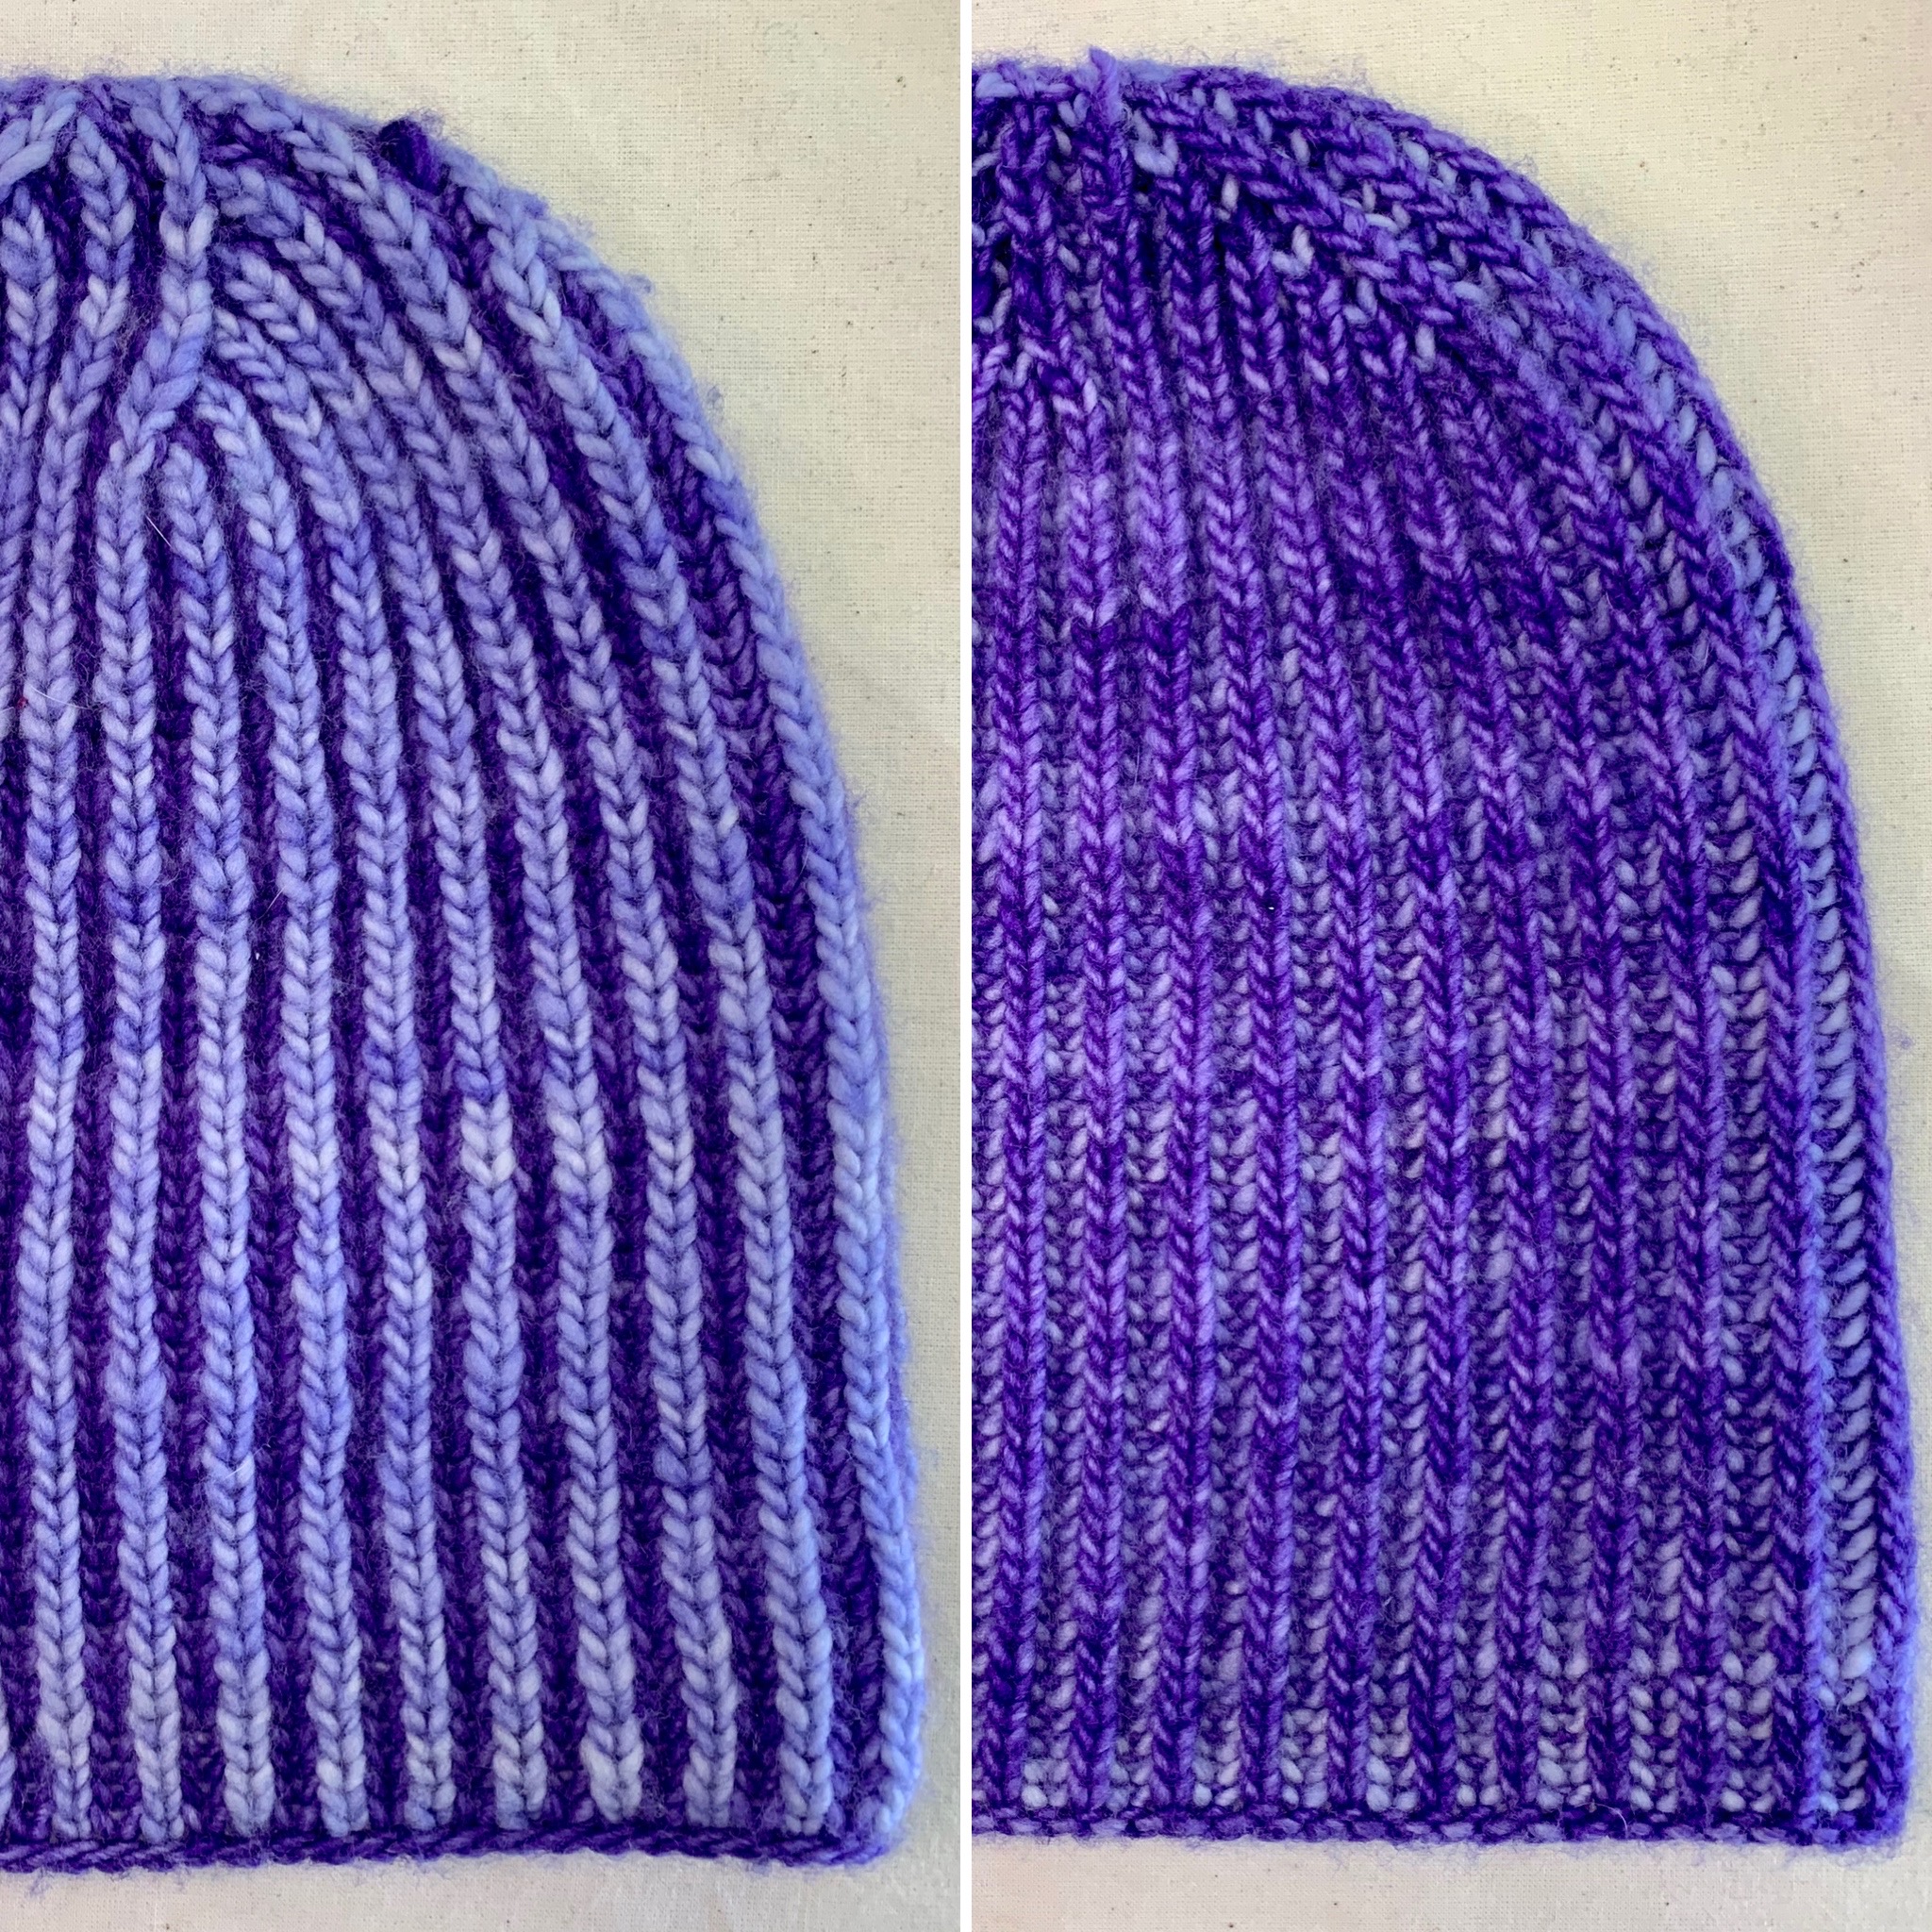 4 Tips for Brioche Knitting